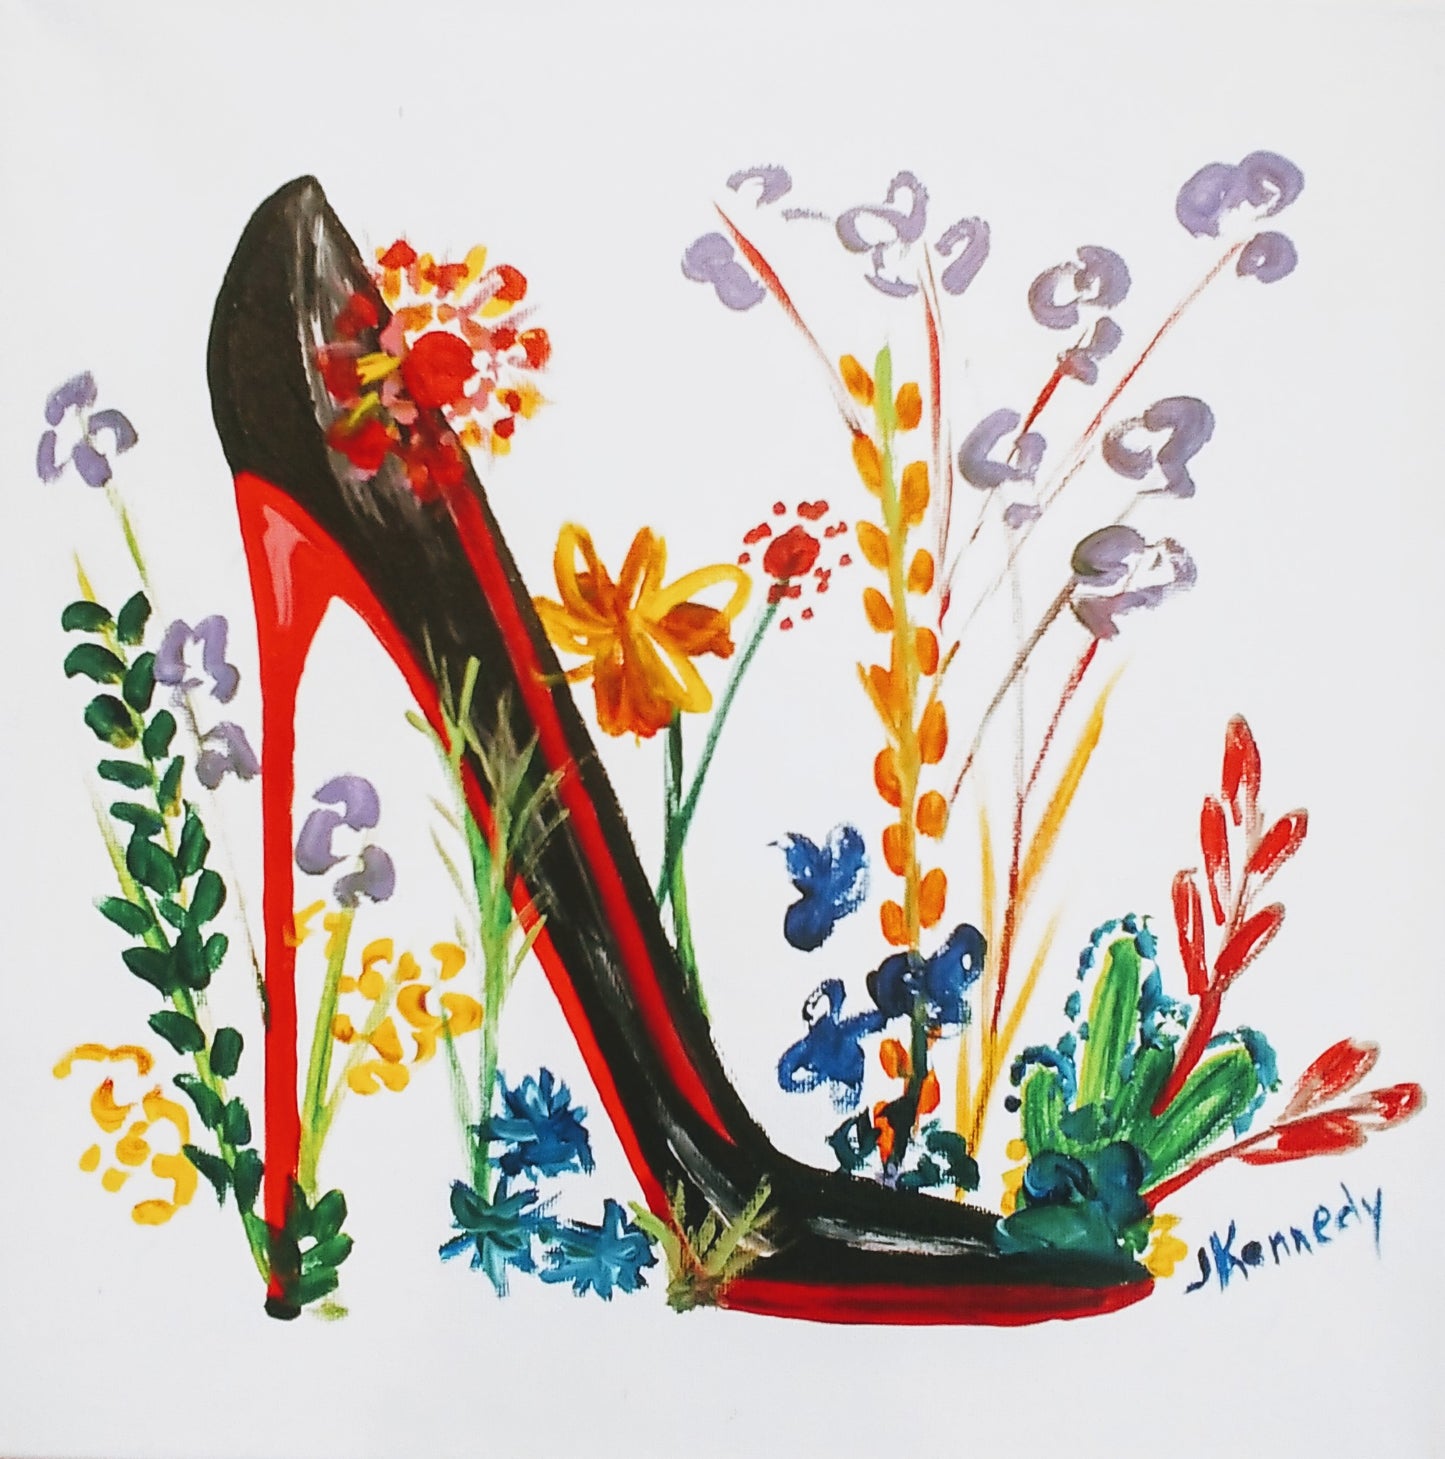 Shoe With Flowers Paint Kit (8x10 or 11x14)